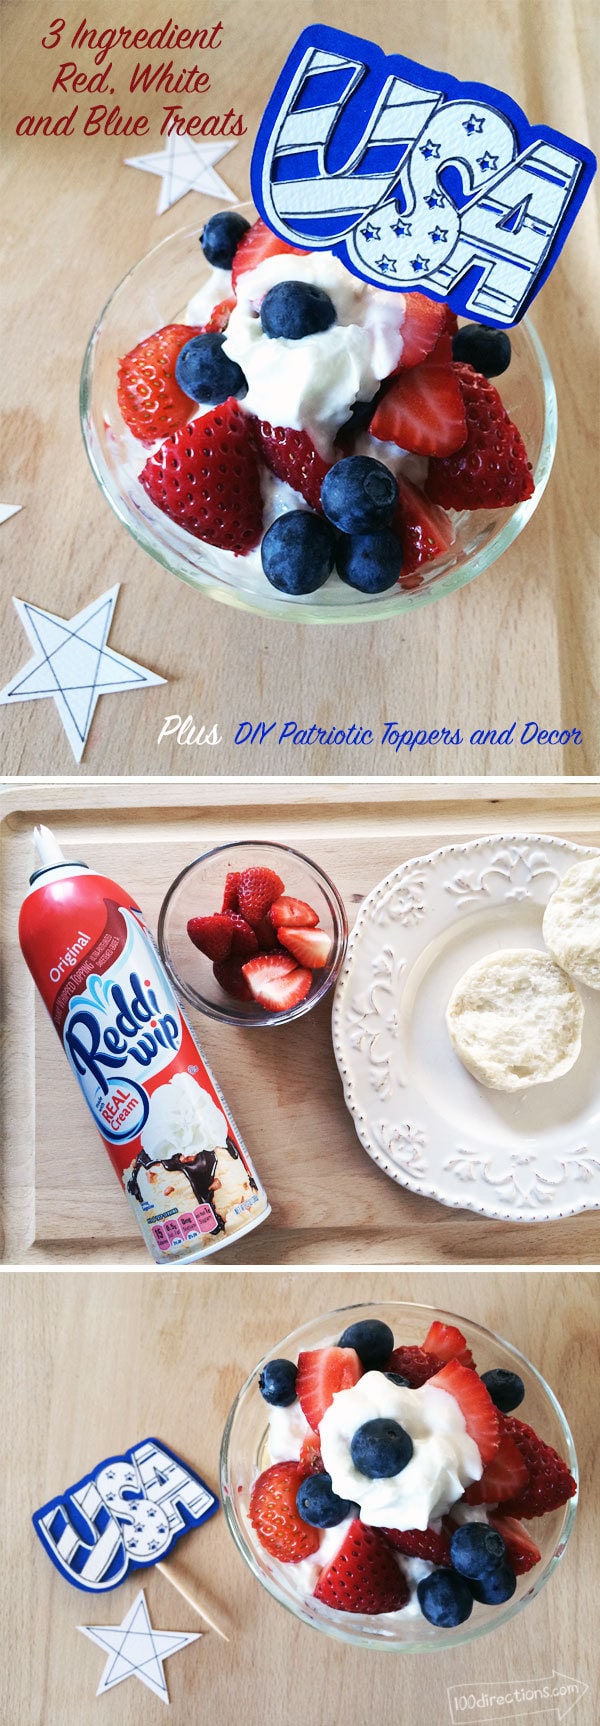 Yummy Berry Treat and Patriotic USA Topper